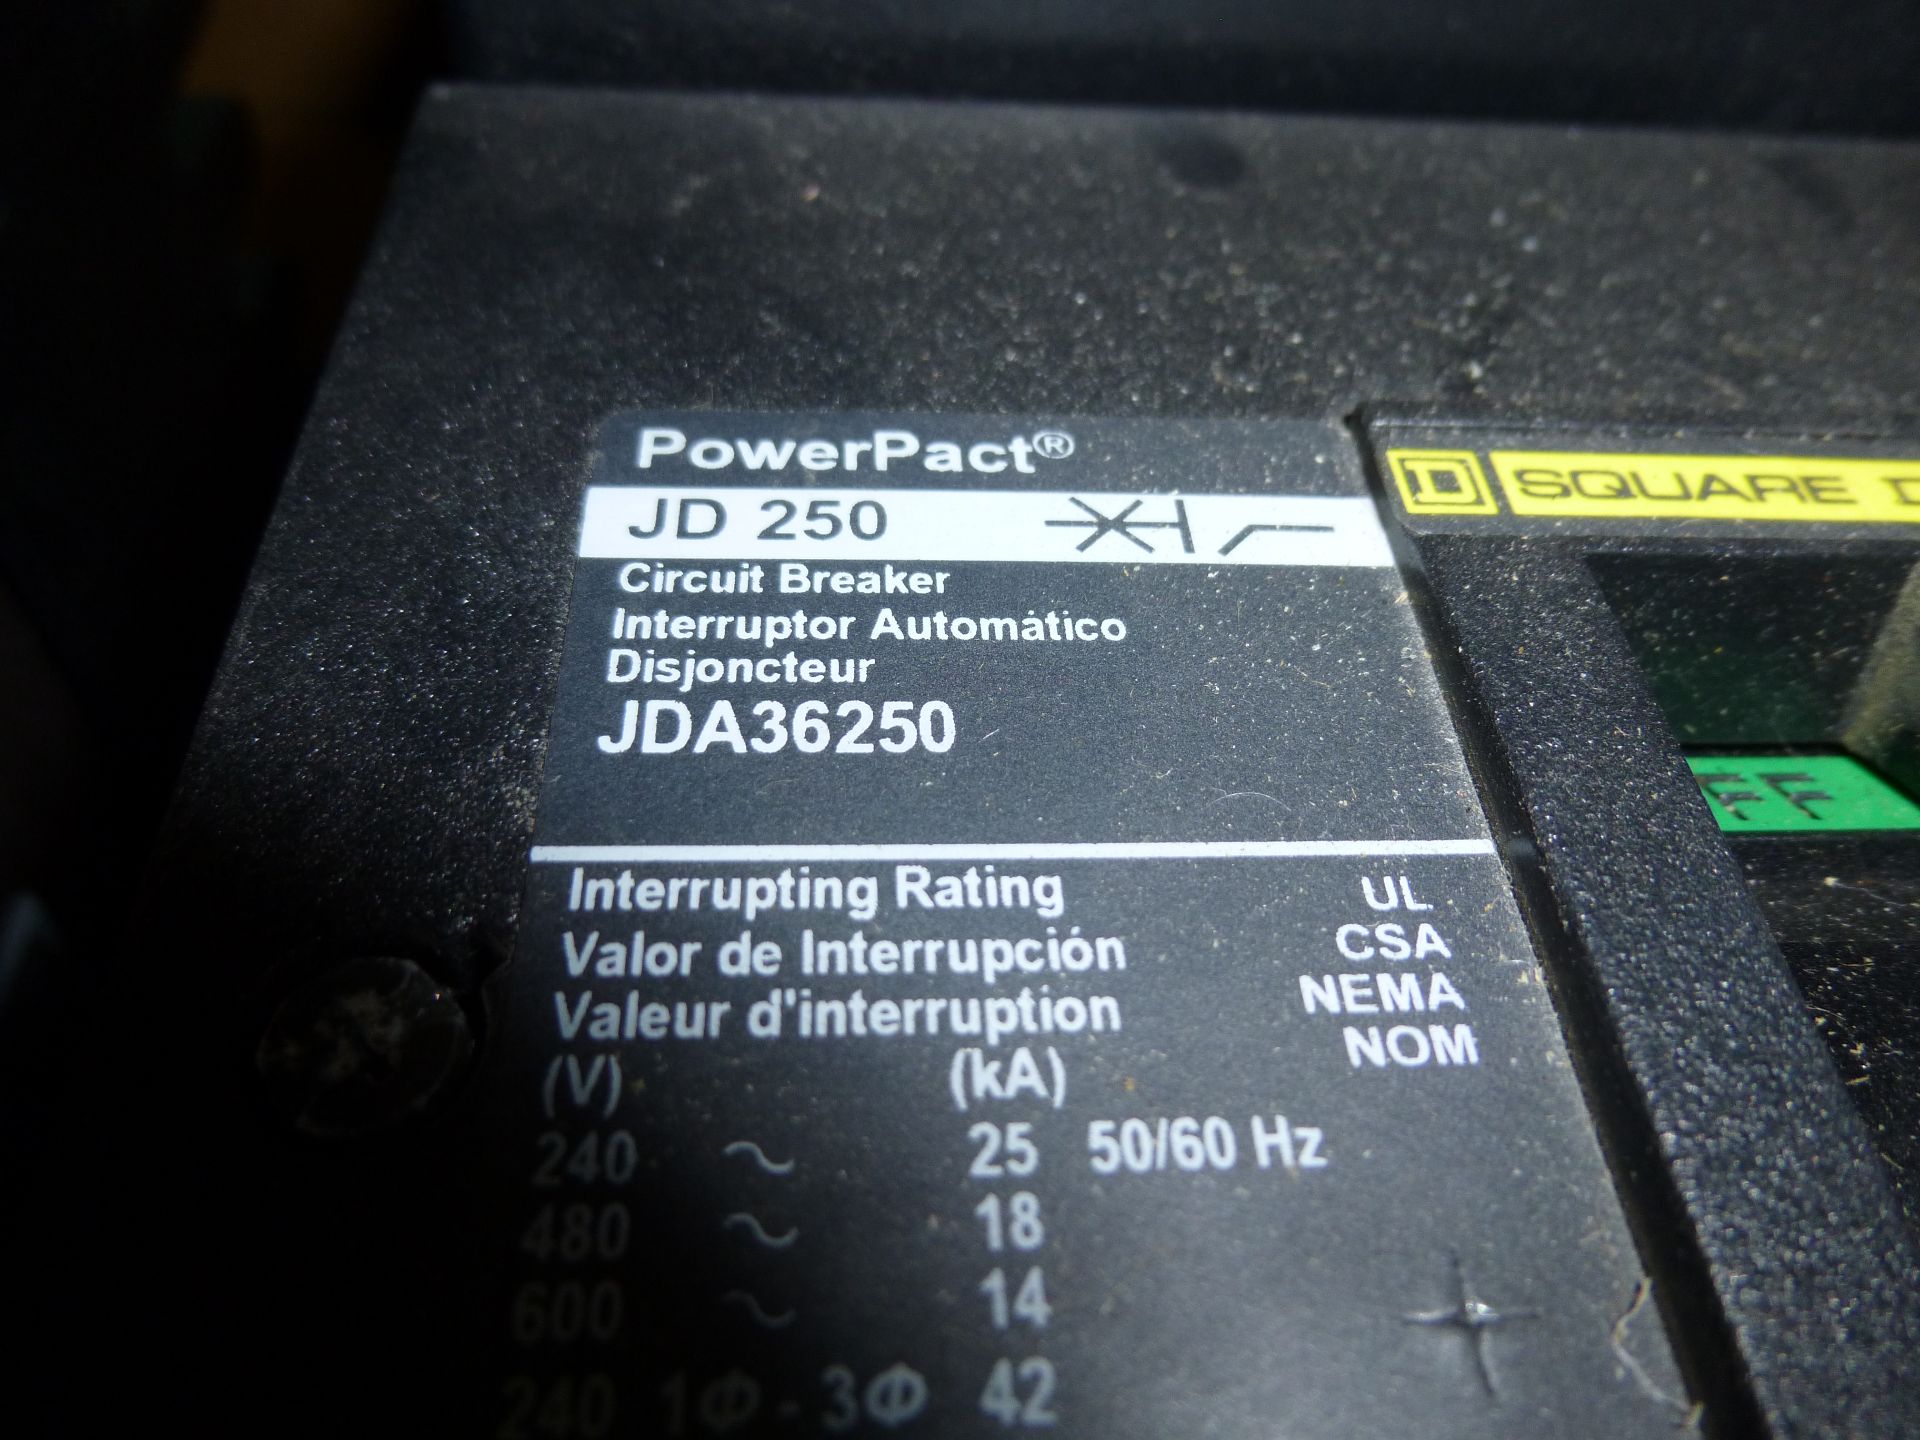 Square D PowerPact JD250, model JDA36250, was pulled from a new breaker box, as always with Brolyn - Image 2 of 2